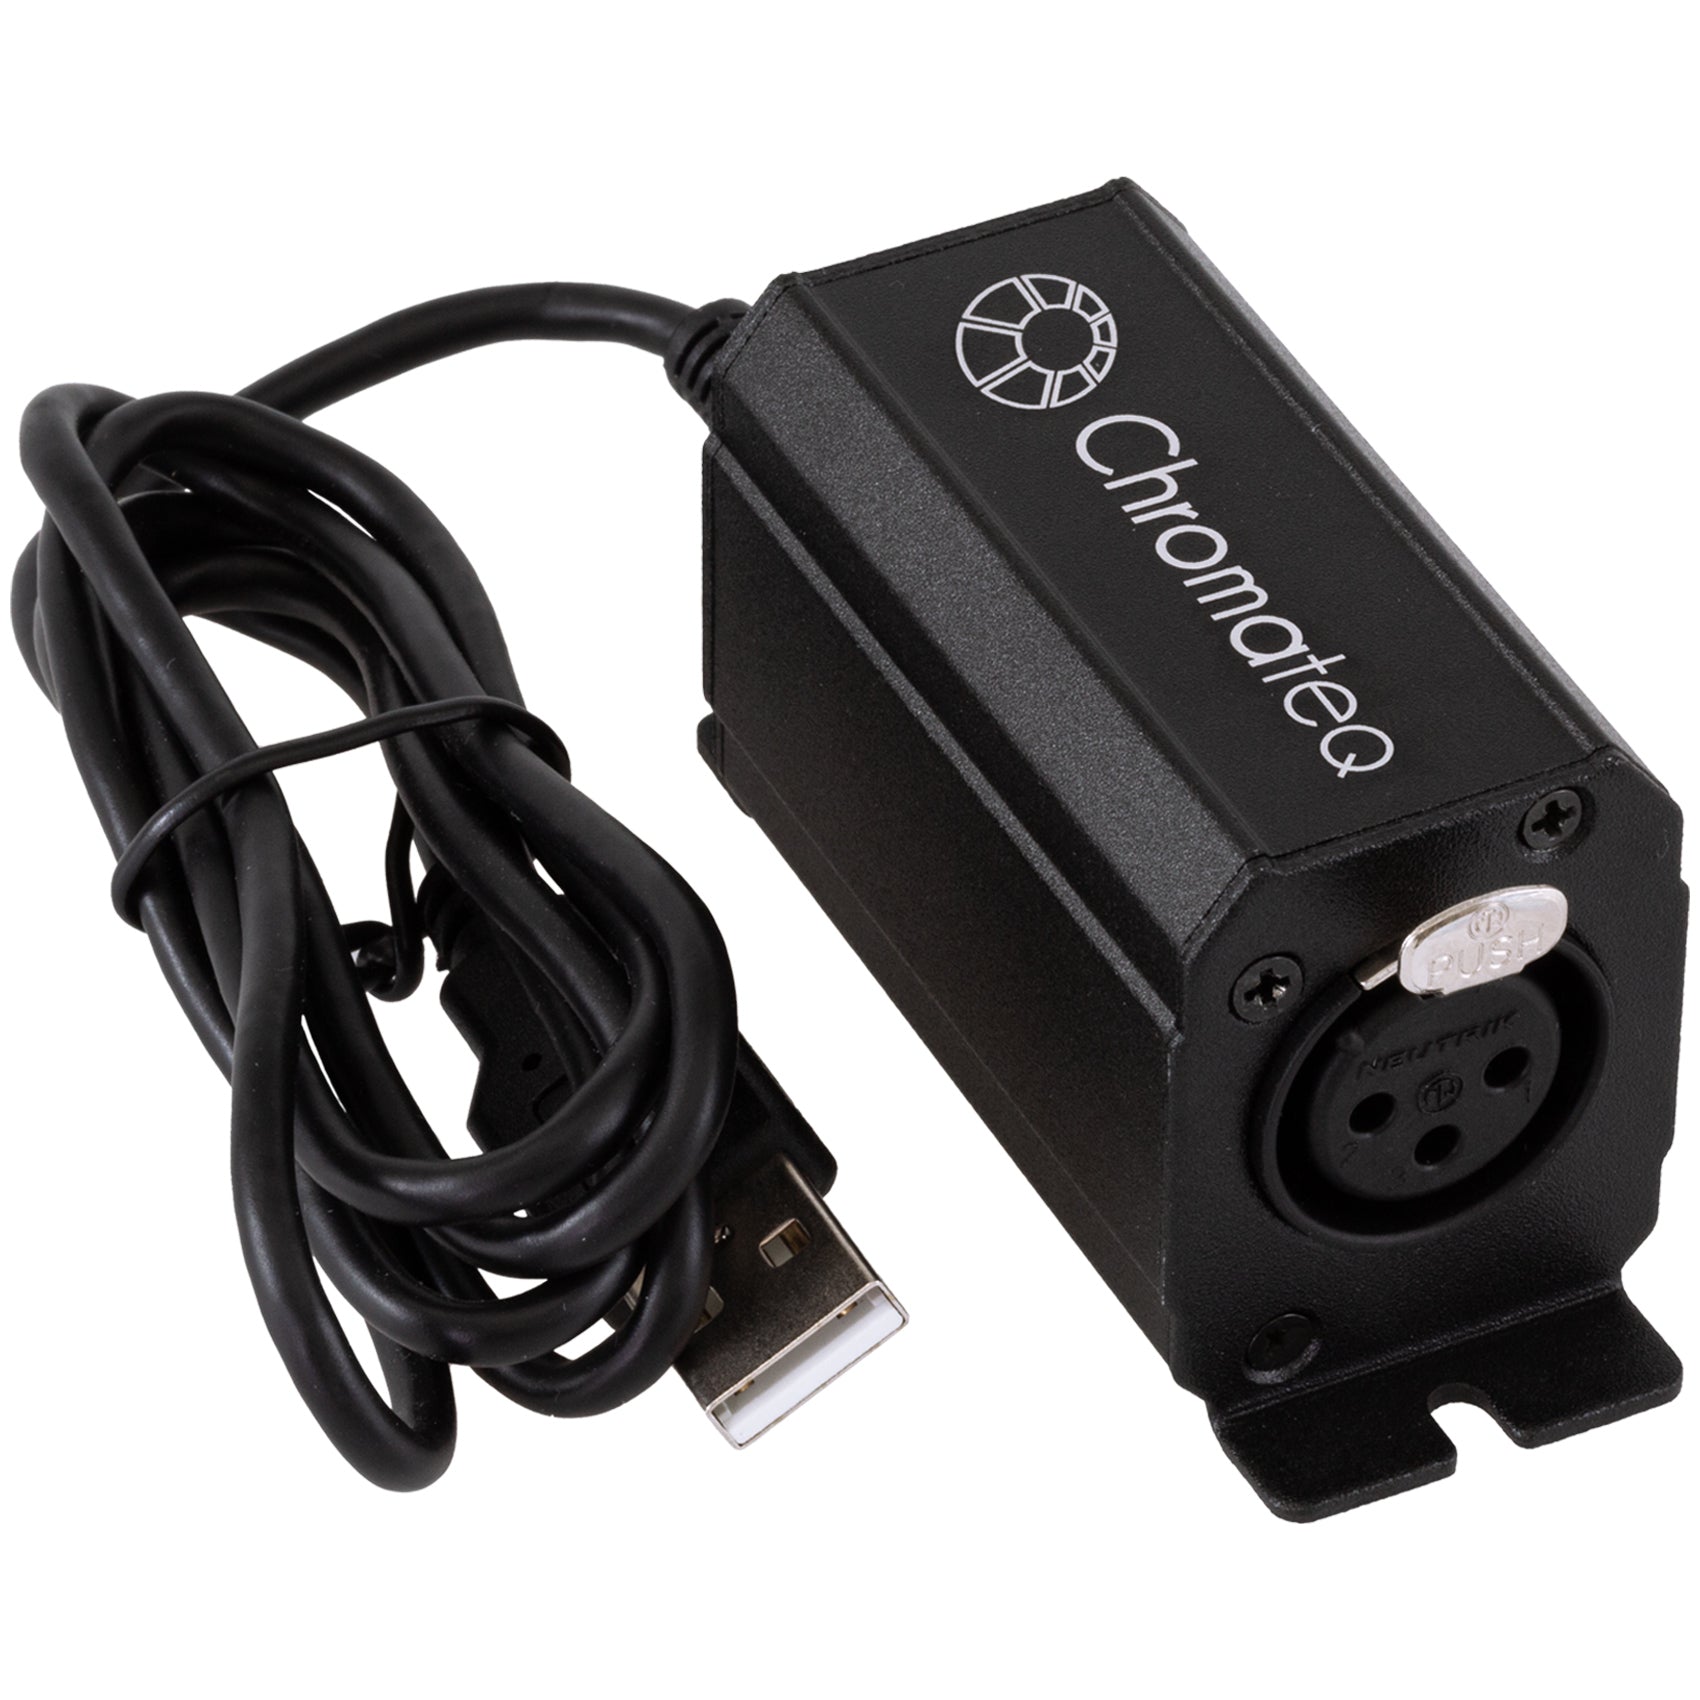 DMX to USB Pro interface Adapter and Controller